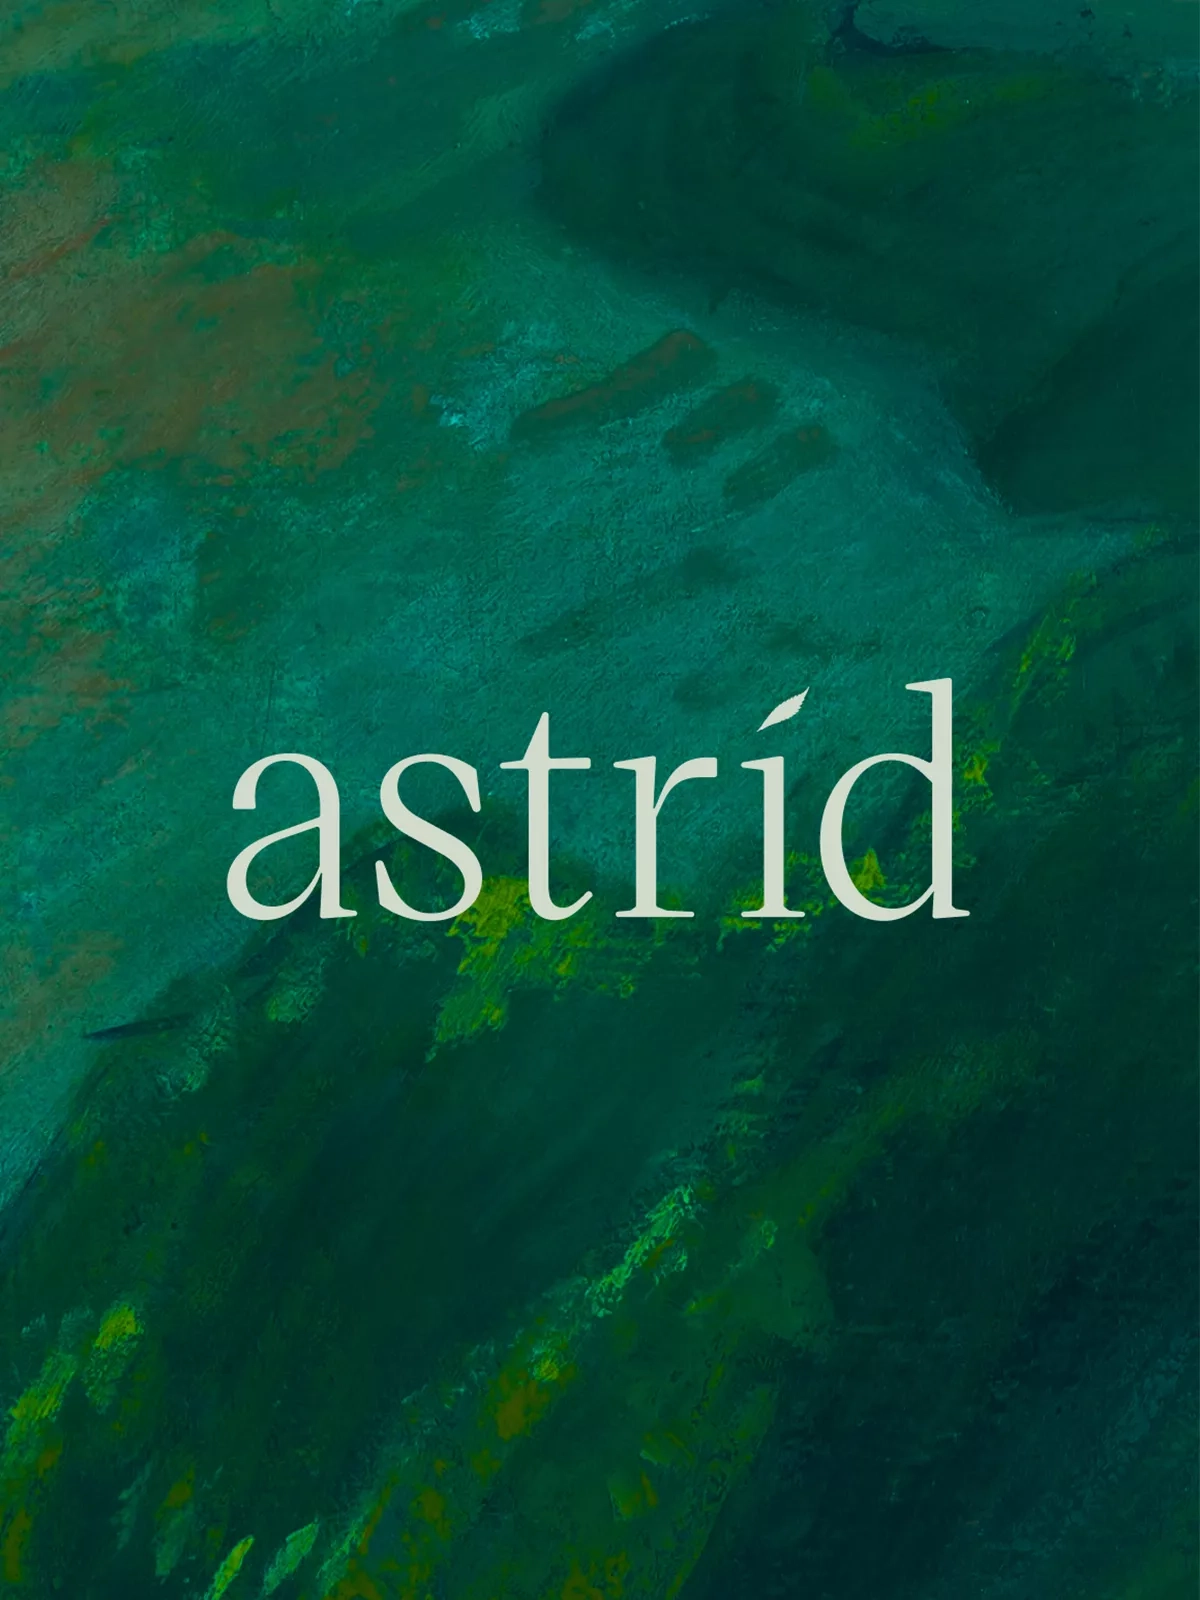 Astrid logo on colourful background